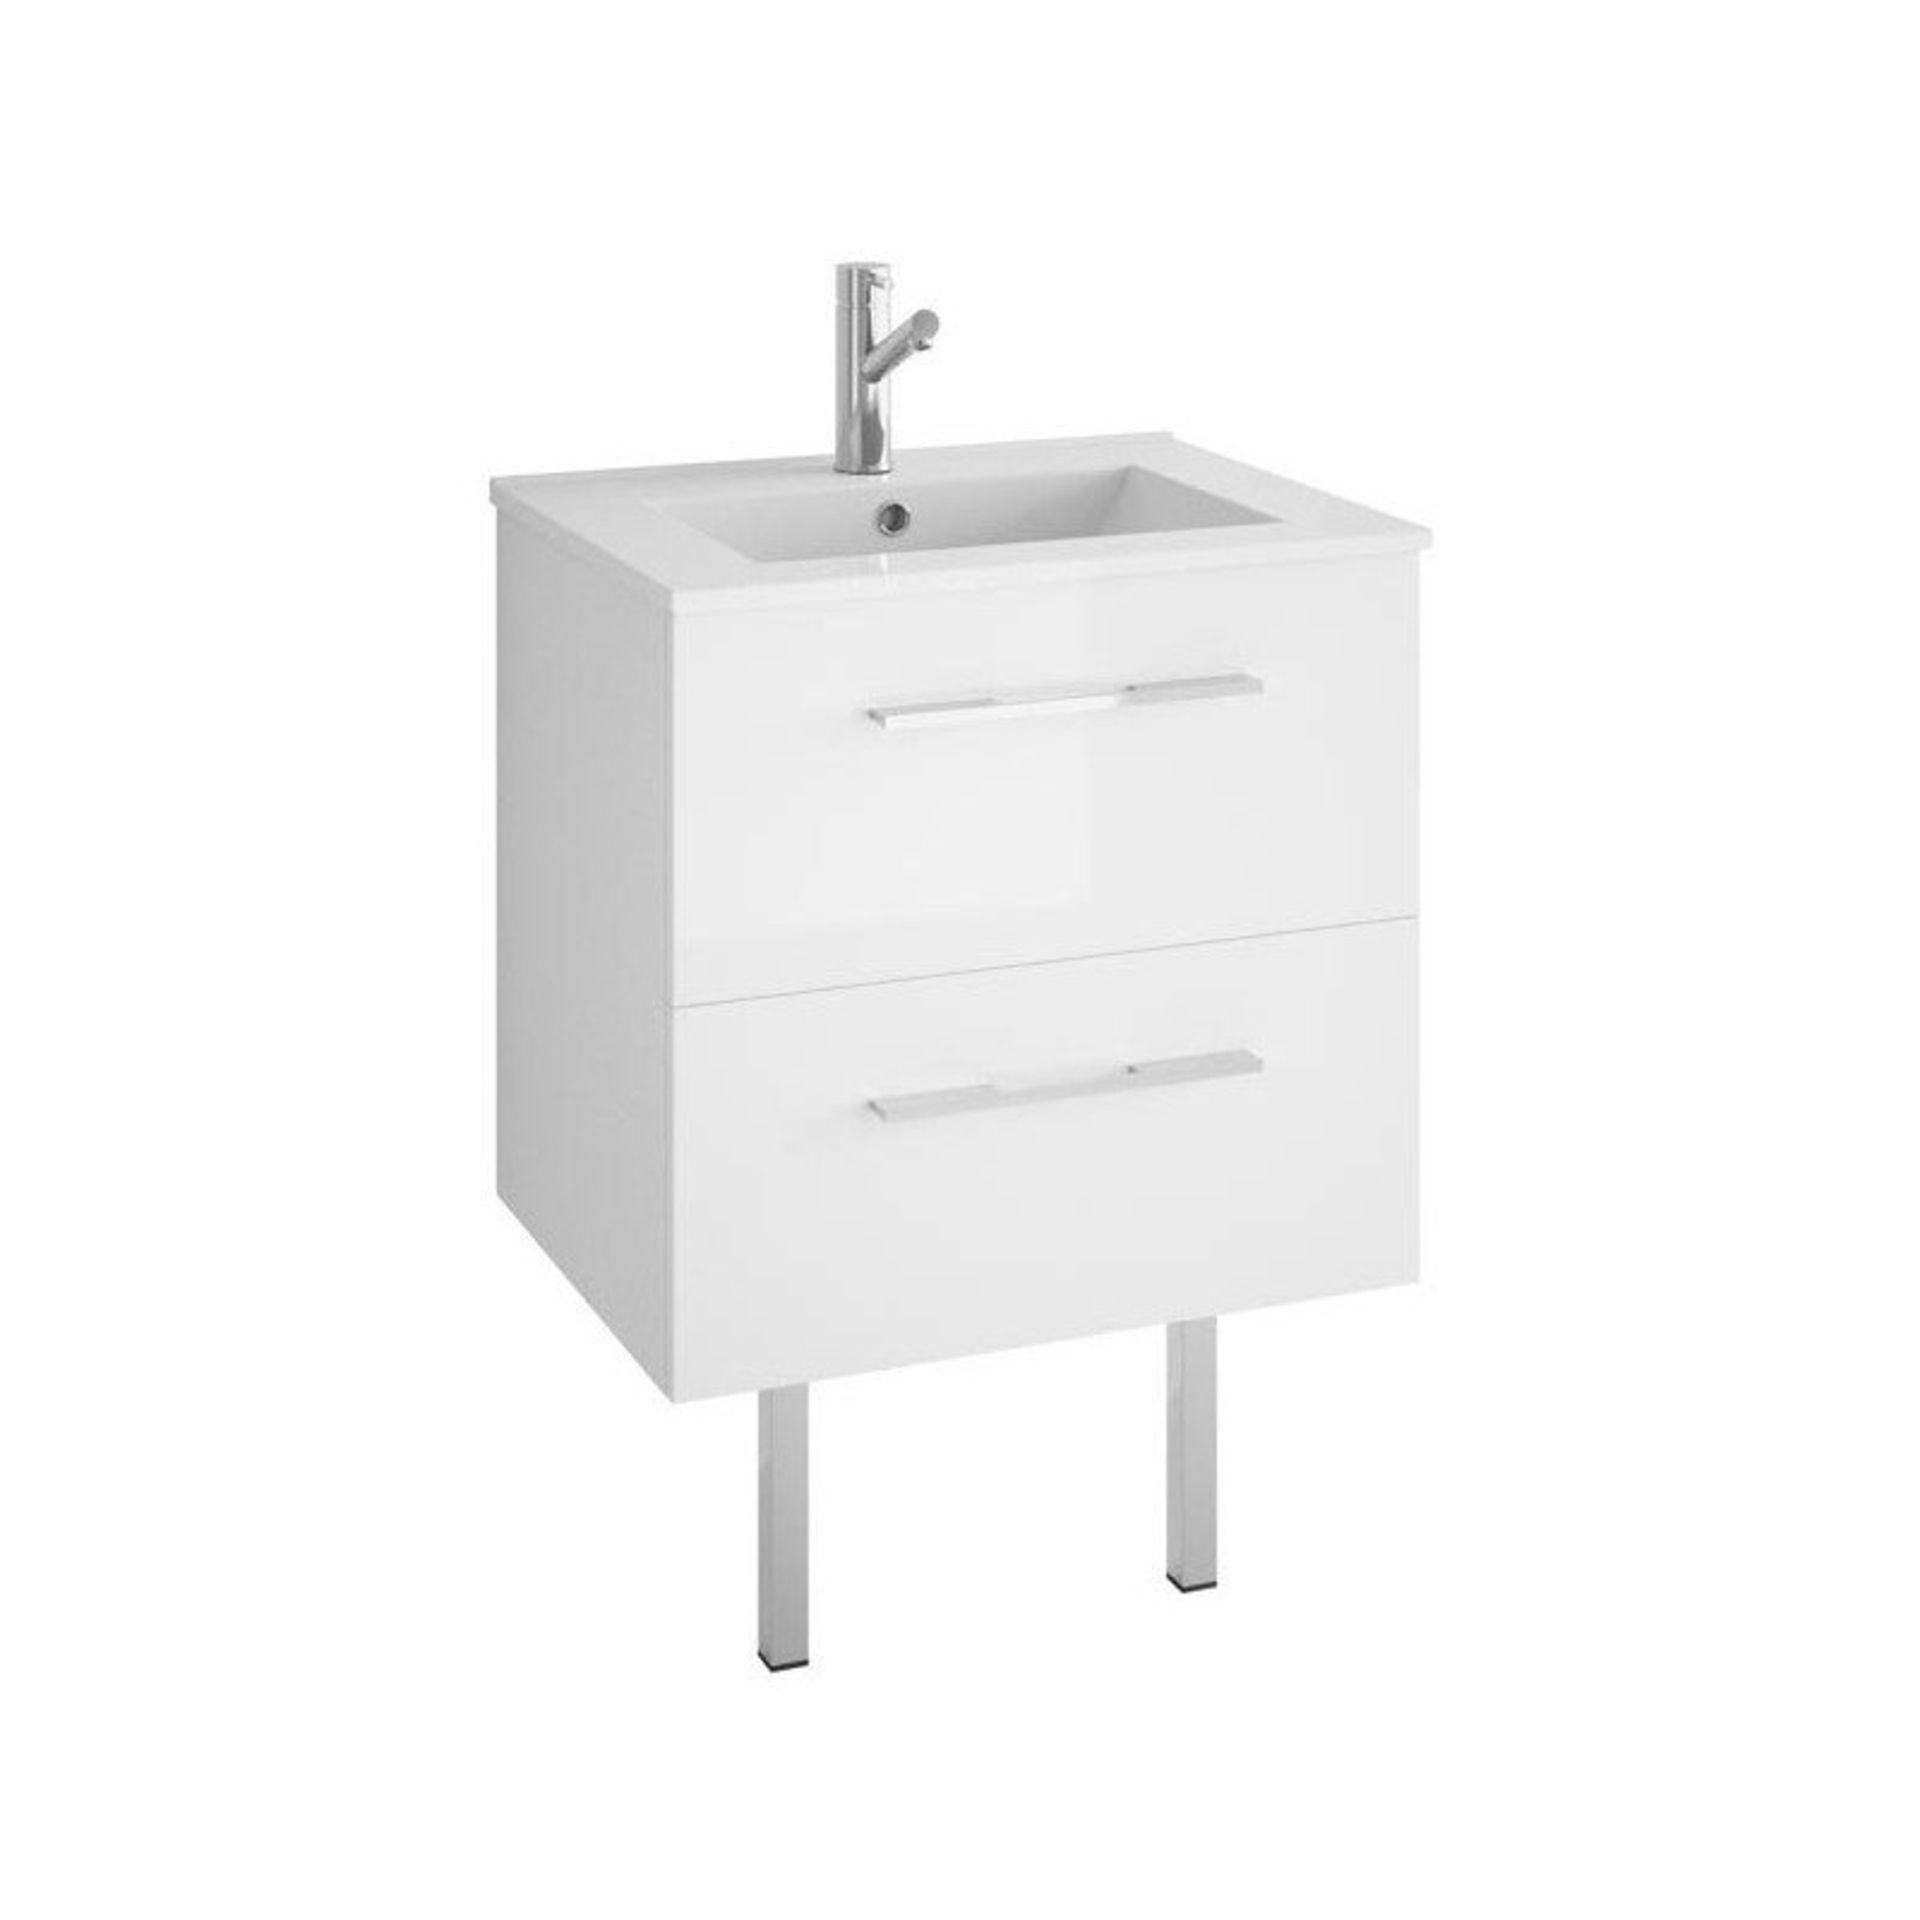 New & Boxed Croydex Chetsford Vanity Unit | Ws010822. The Croydex Chetsford Vanity Unit Is A - Bild 2 aus 2